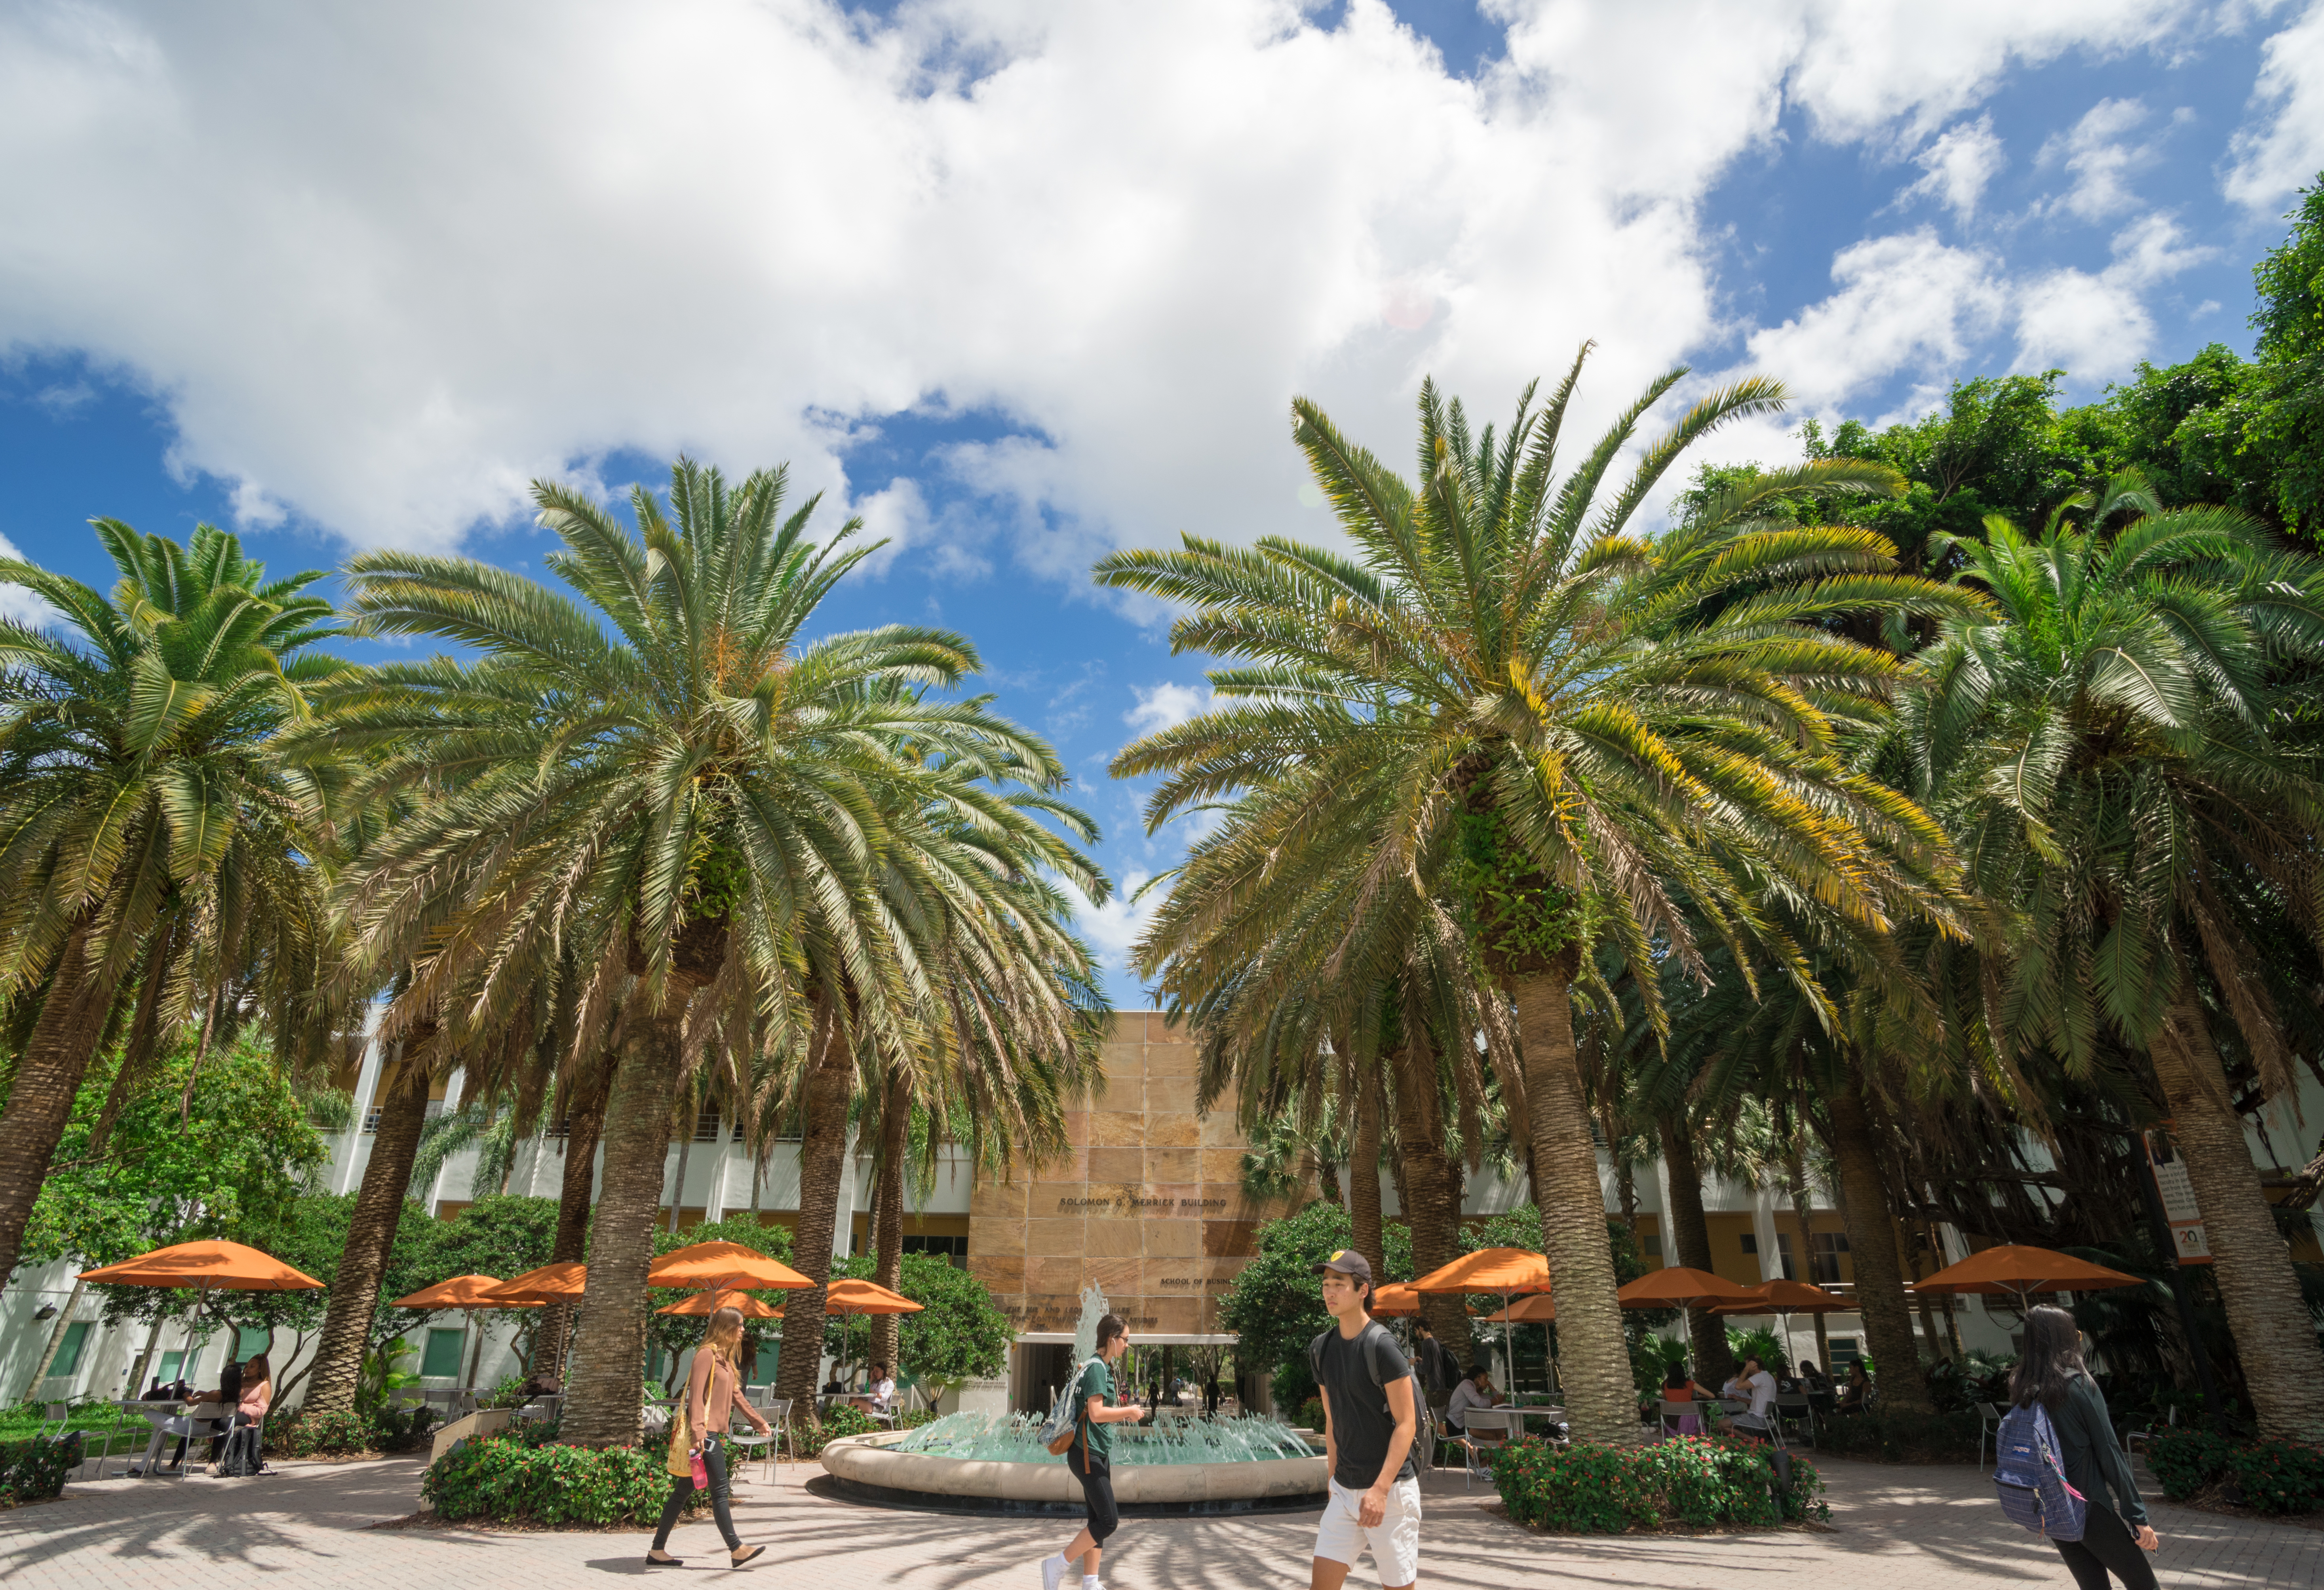 Students walking on campus, fountain and palm trees in the background.